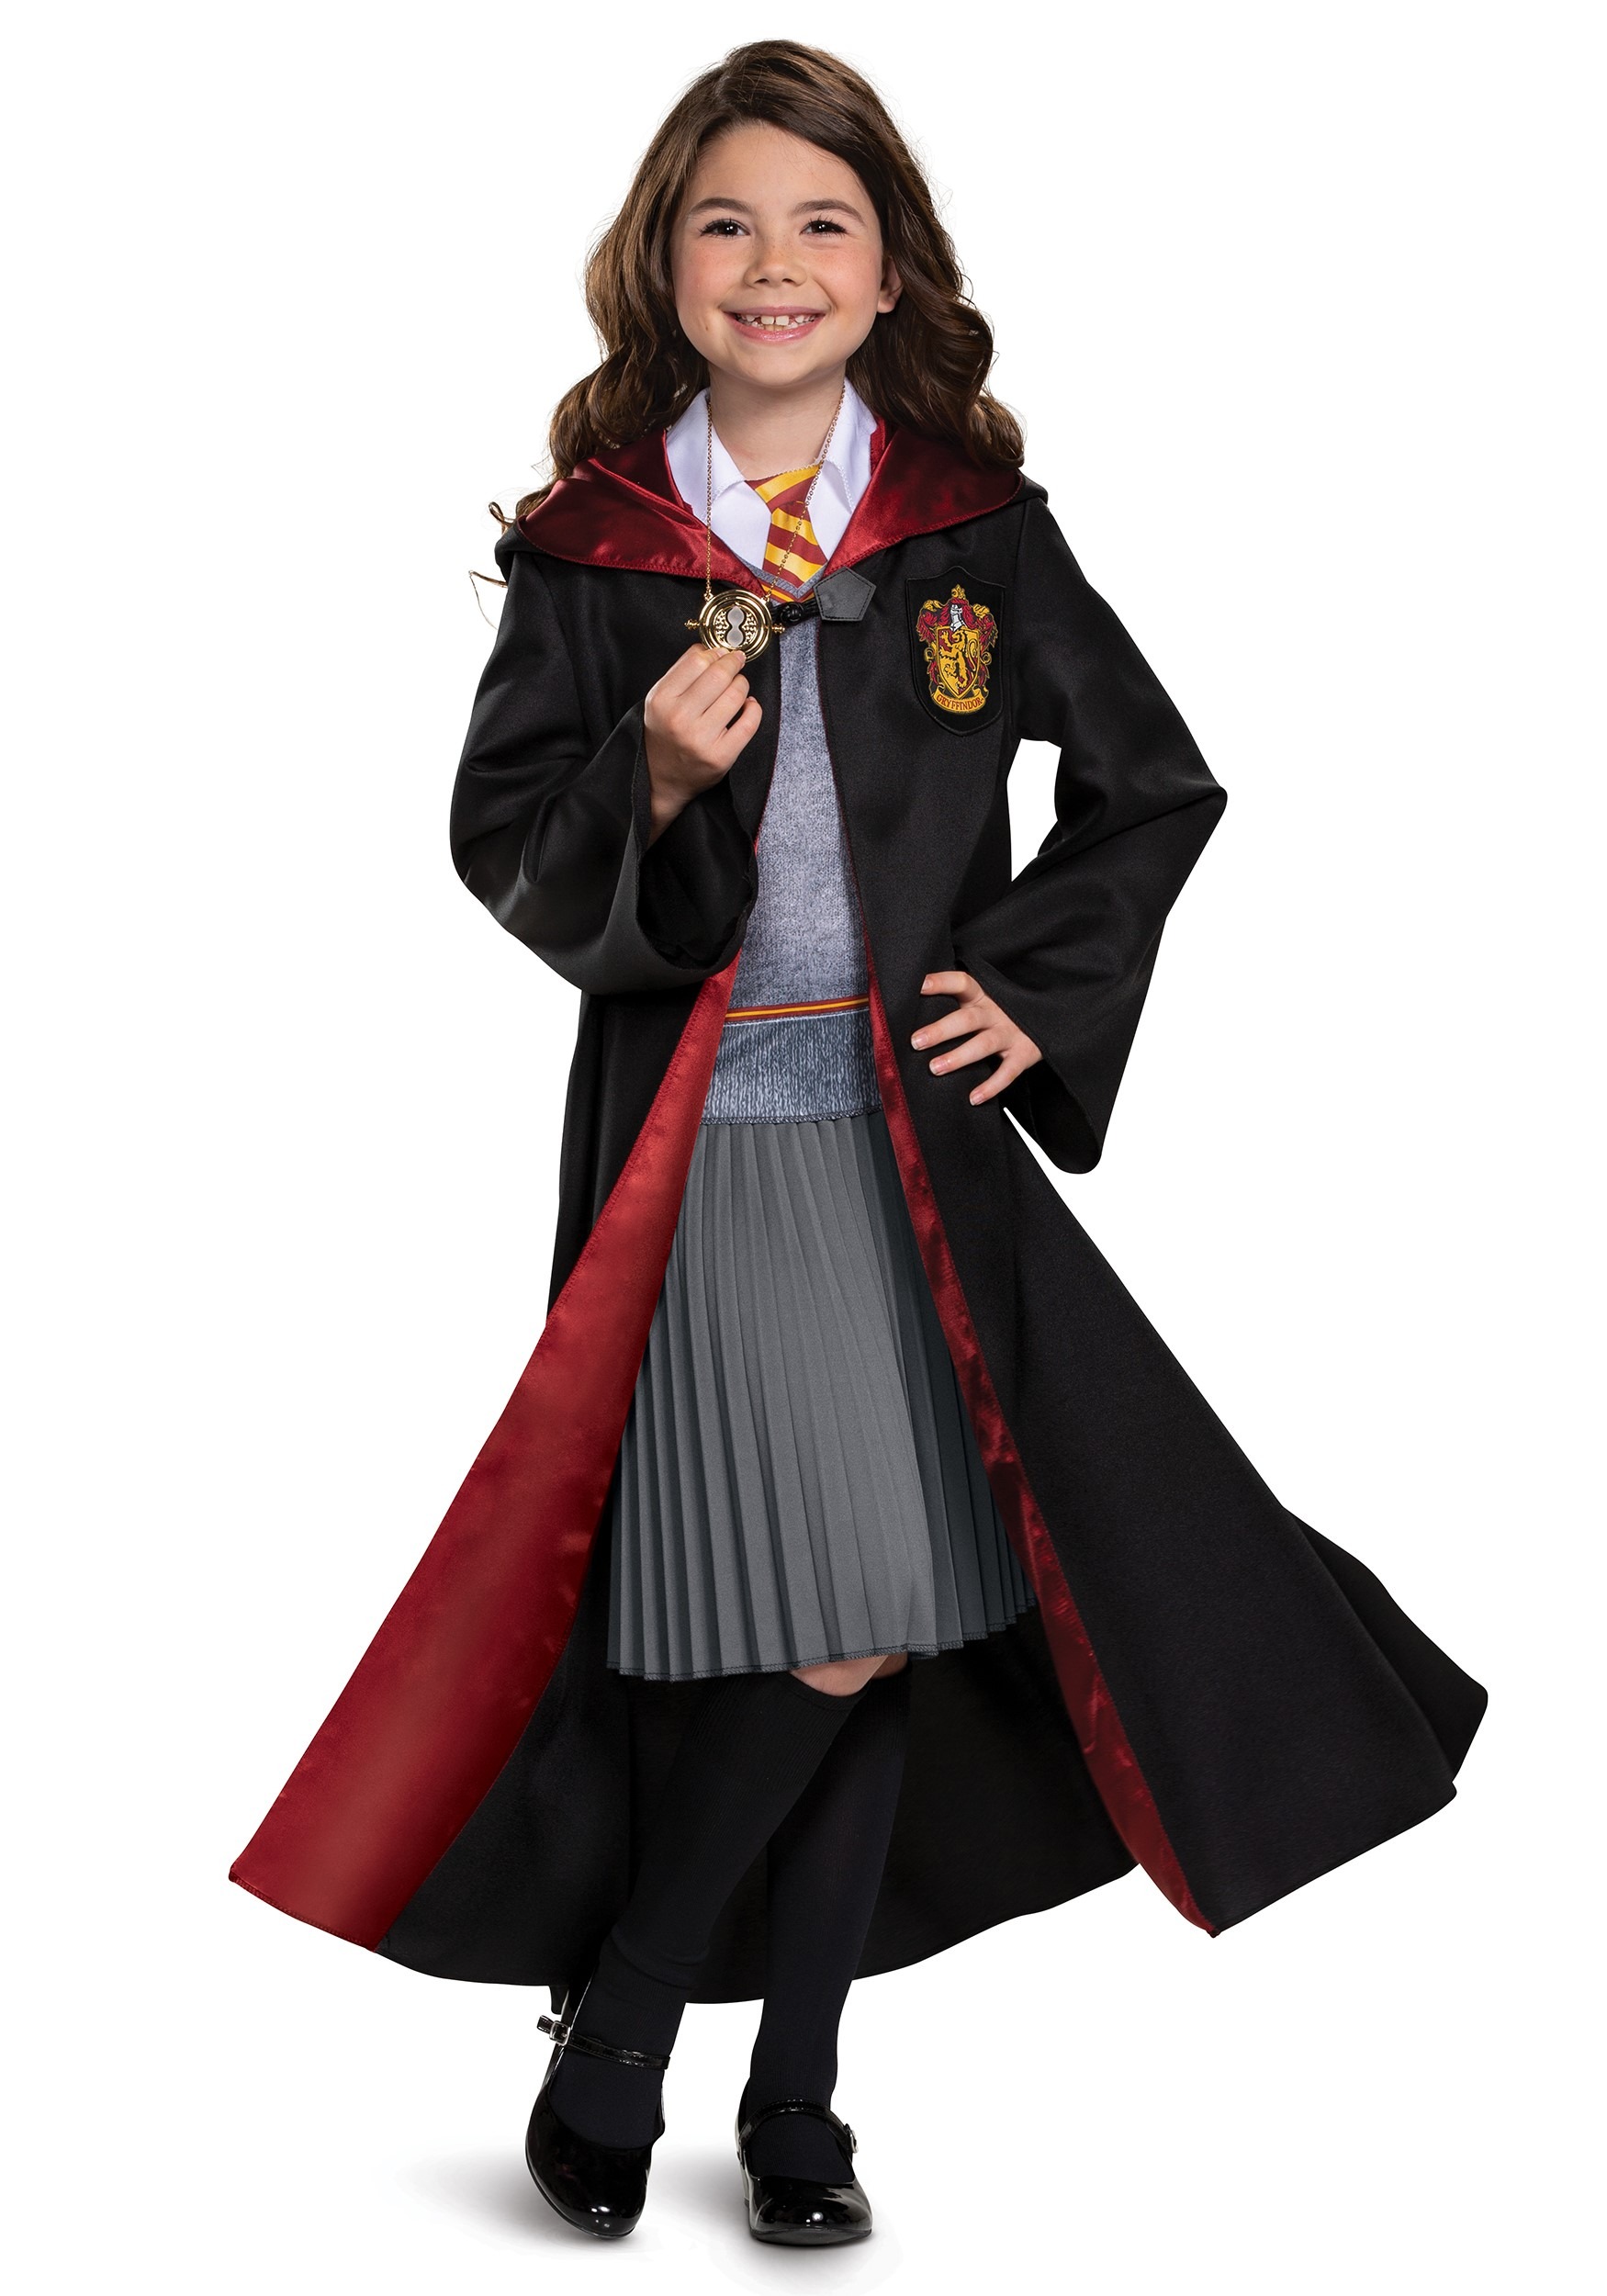 https://images.fun.com/products/66103/2-1-148123/girls-harry-potter-deluxe-hermione-costume-2.jpg